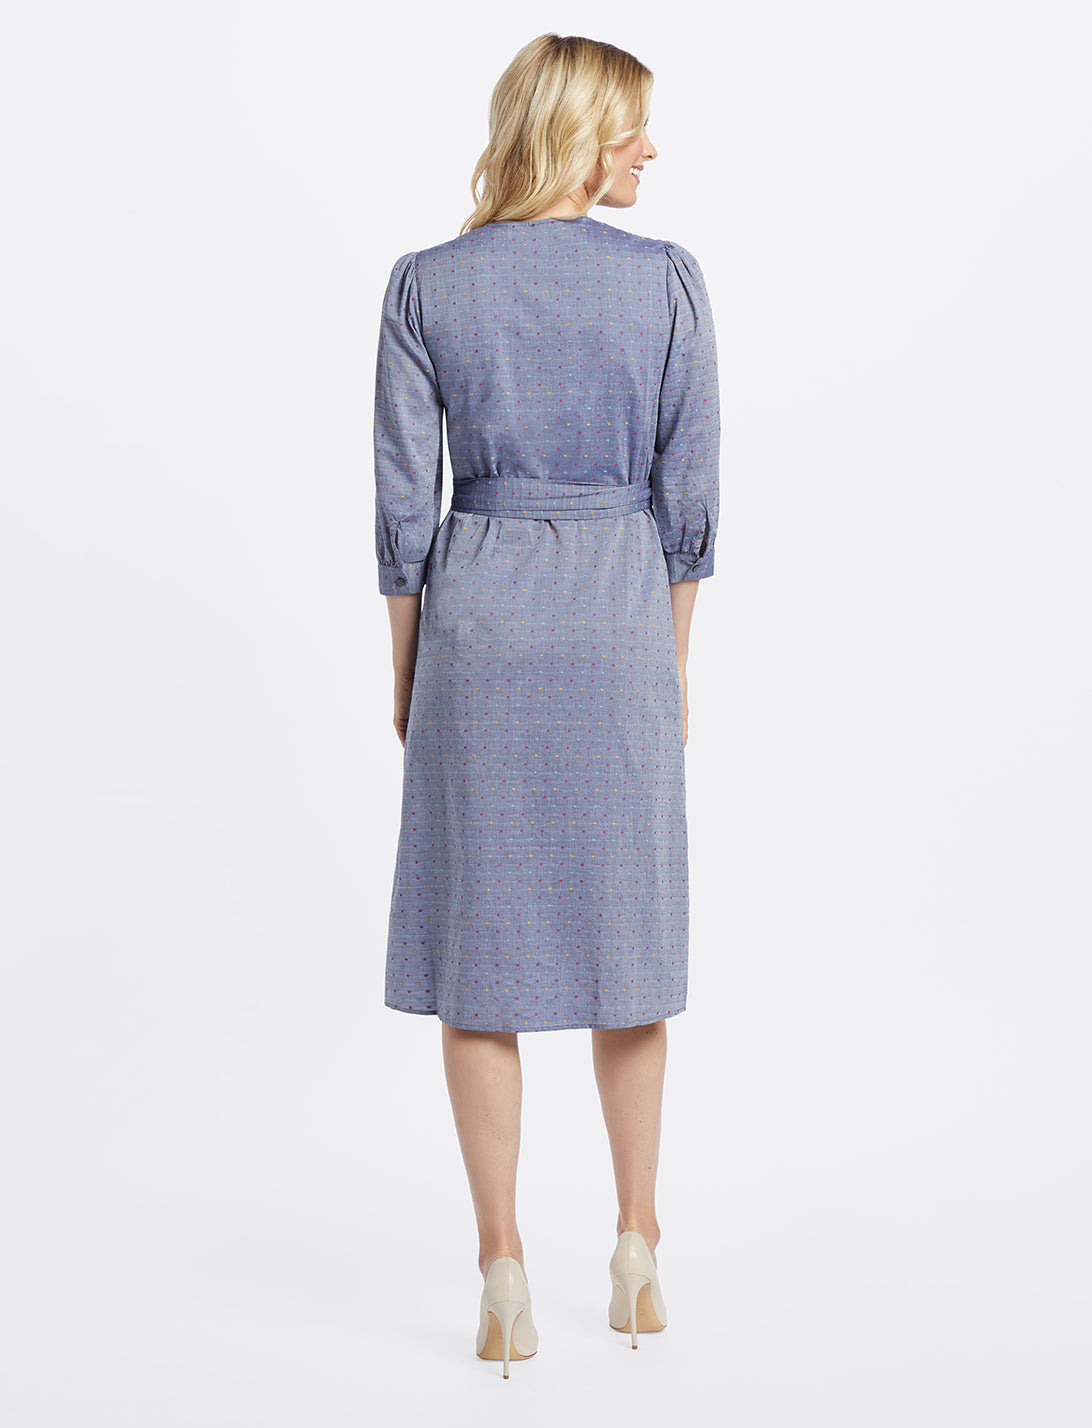 Embroidered Dot Chambray Wrap Dress